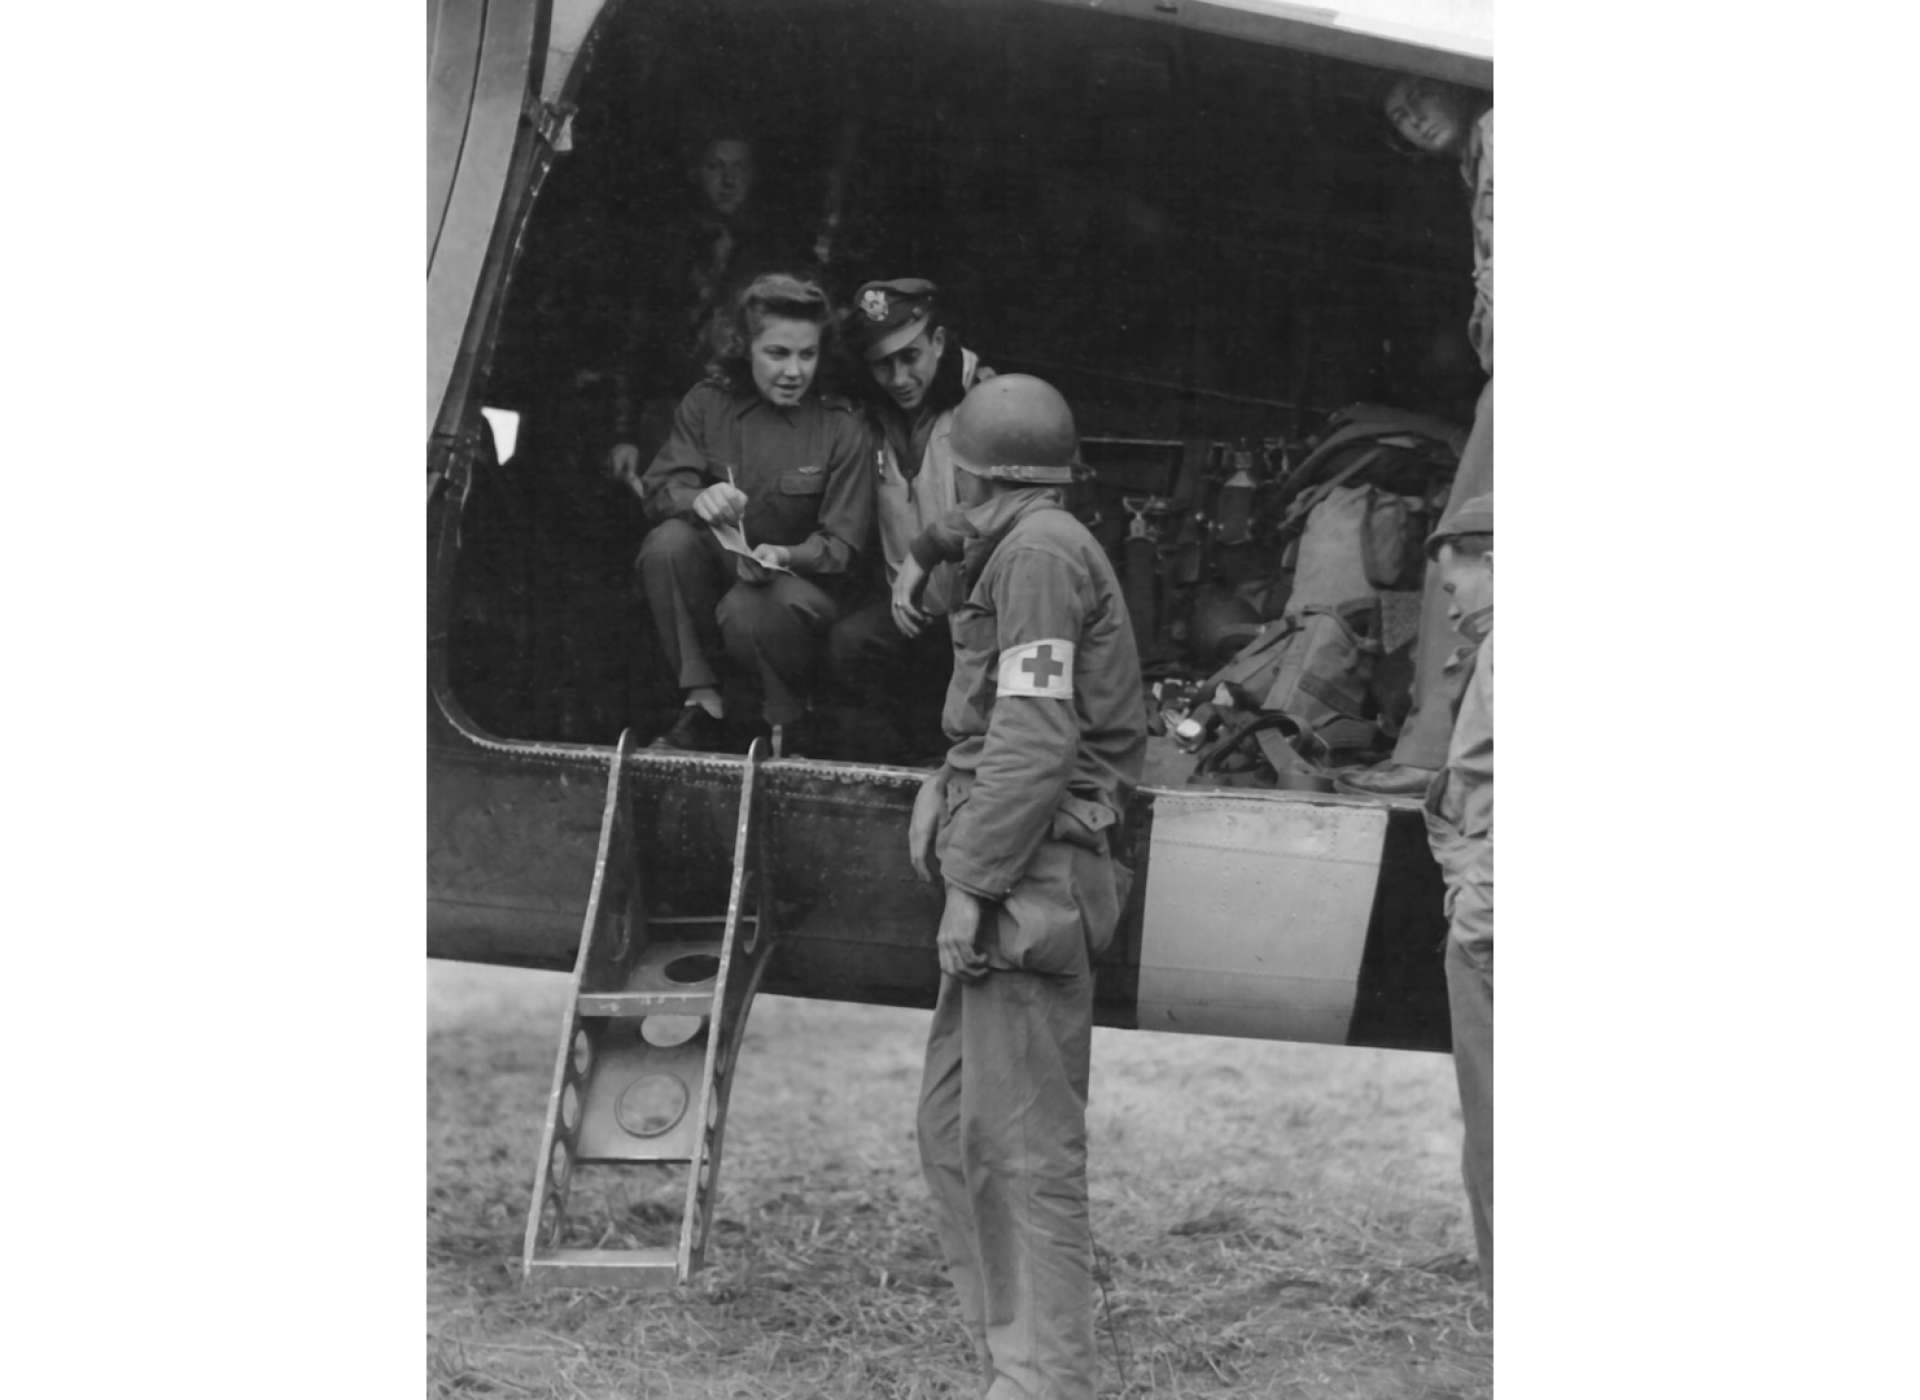 In 1942 the War Department ordered the development of a formal training program for flight nurses and other service personnel for aeromedical evacuation duties. By the end of the war, over 70 percent of the Air Transport Command was serving overseas. (Department of Defense)